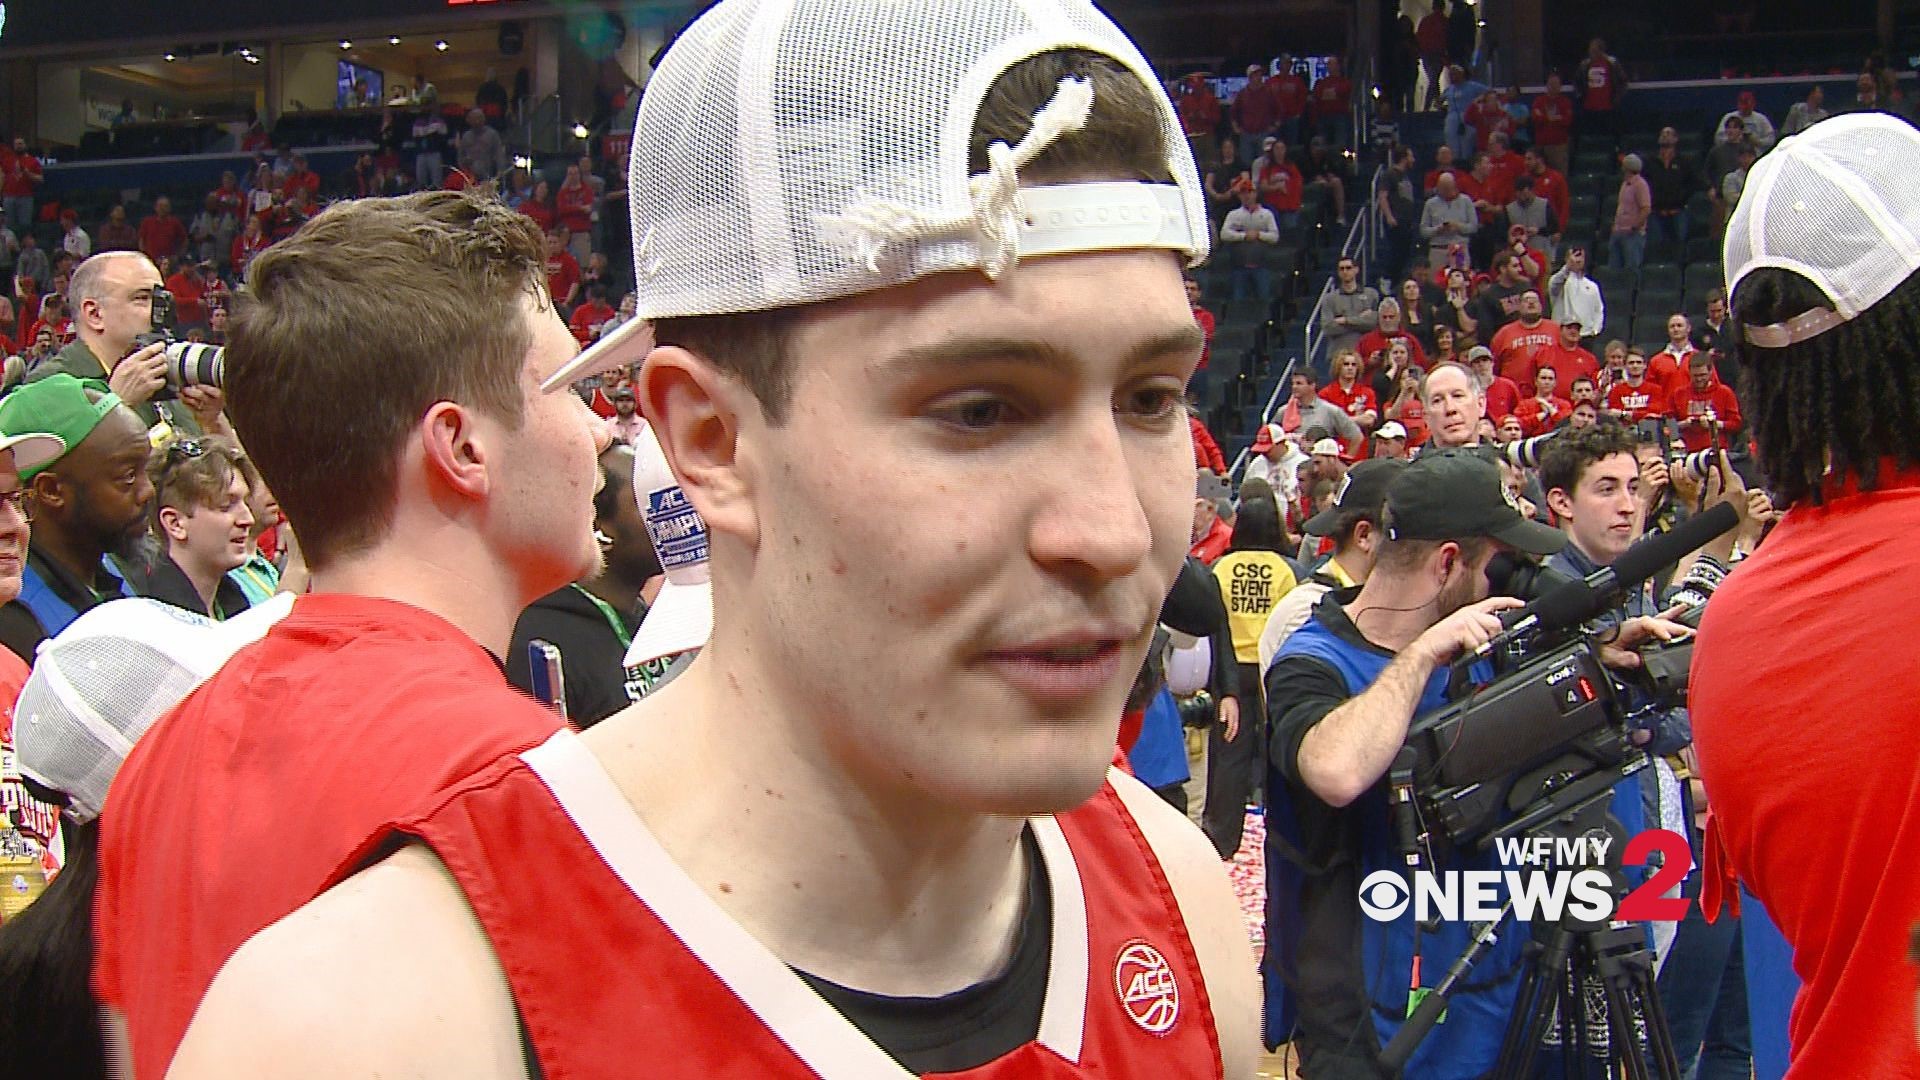 O'Connell scored 10 points in the Wolfpack's 84-76 win.